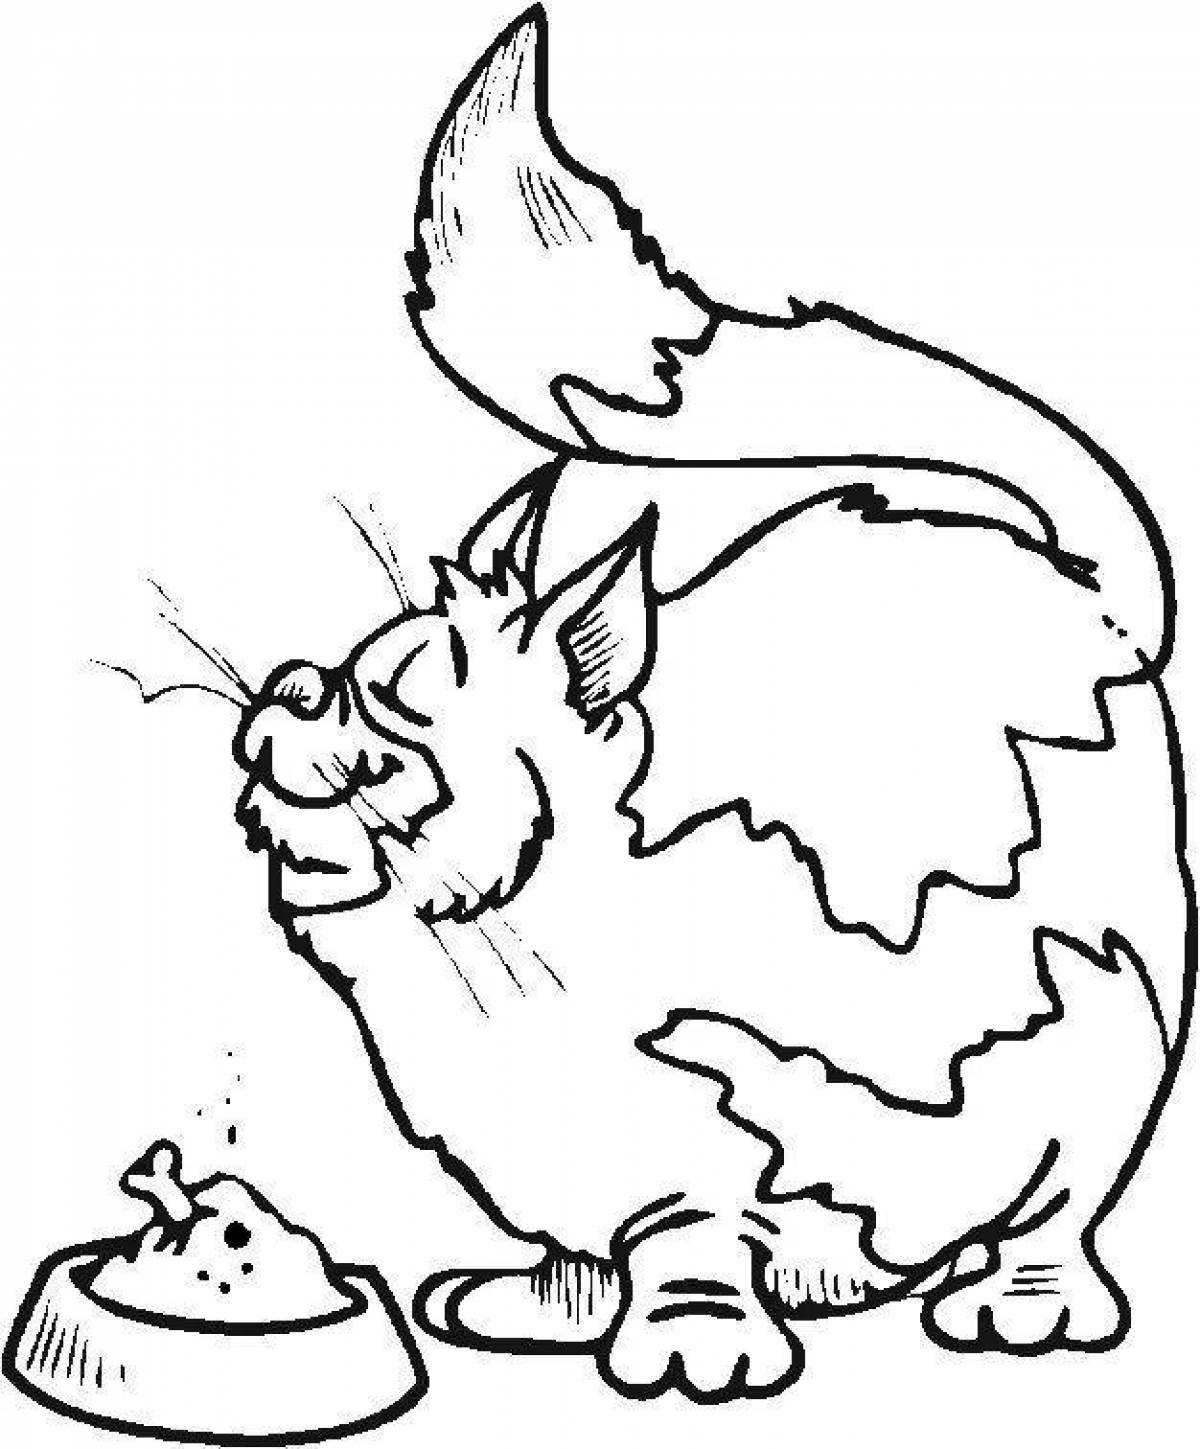 Affectionate fat cat coloring page